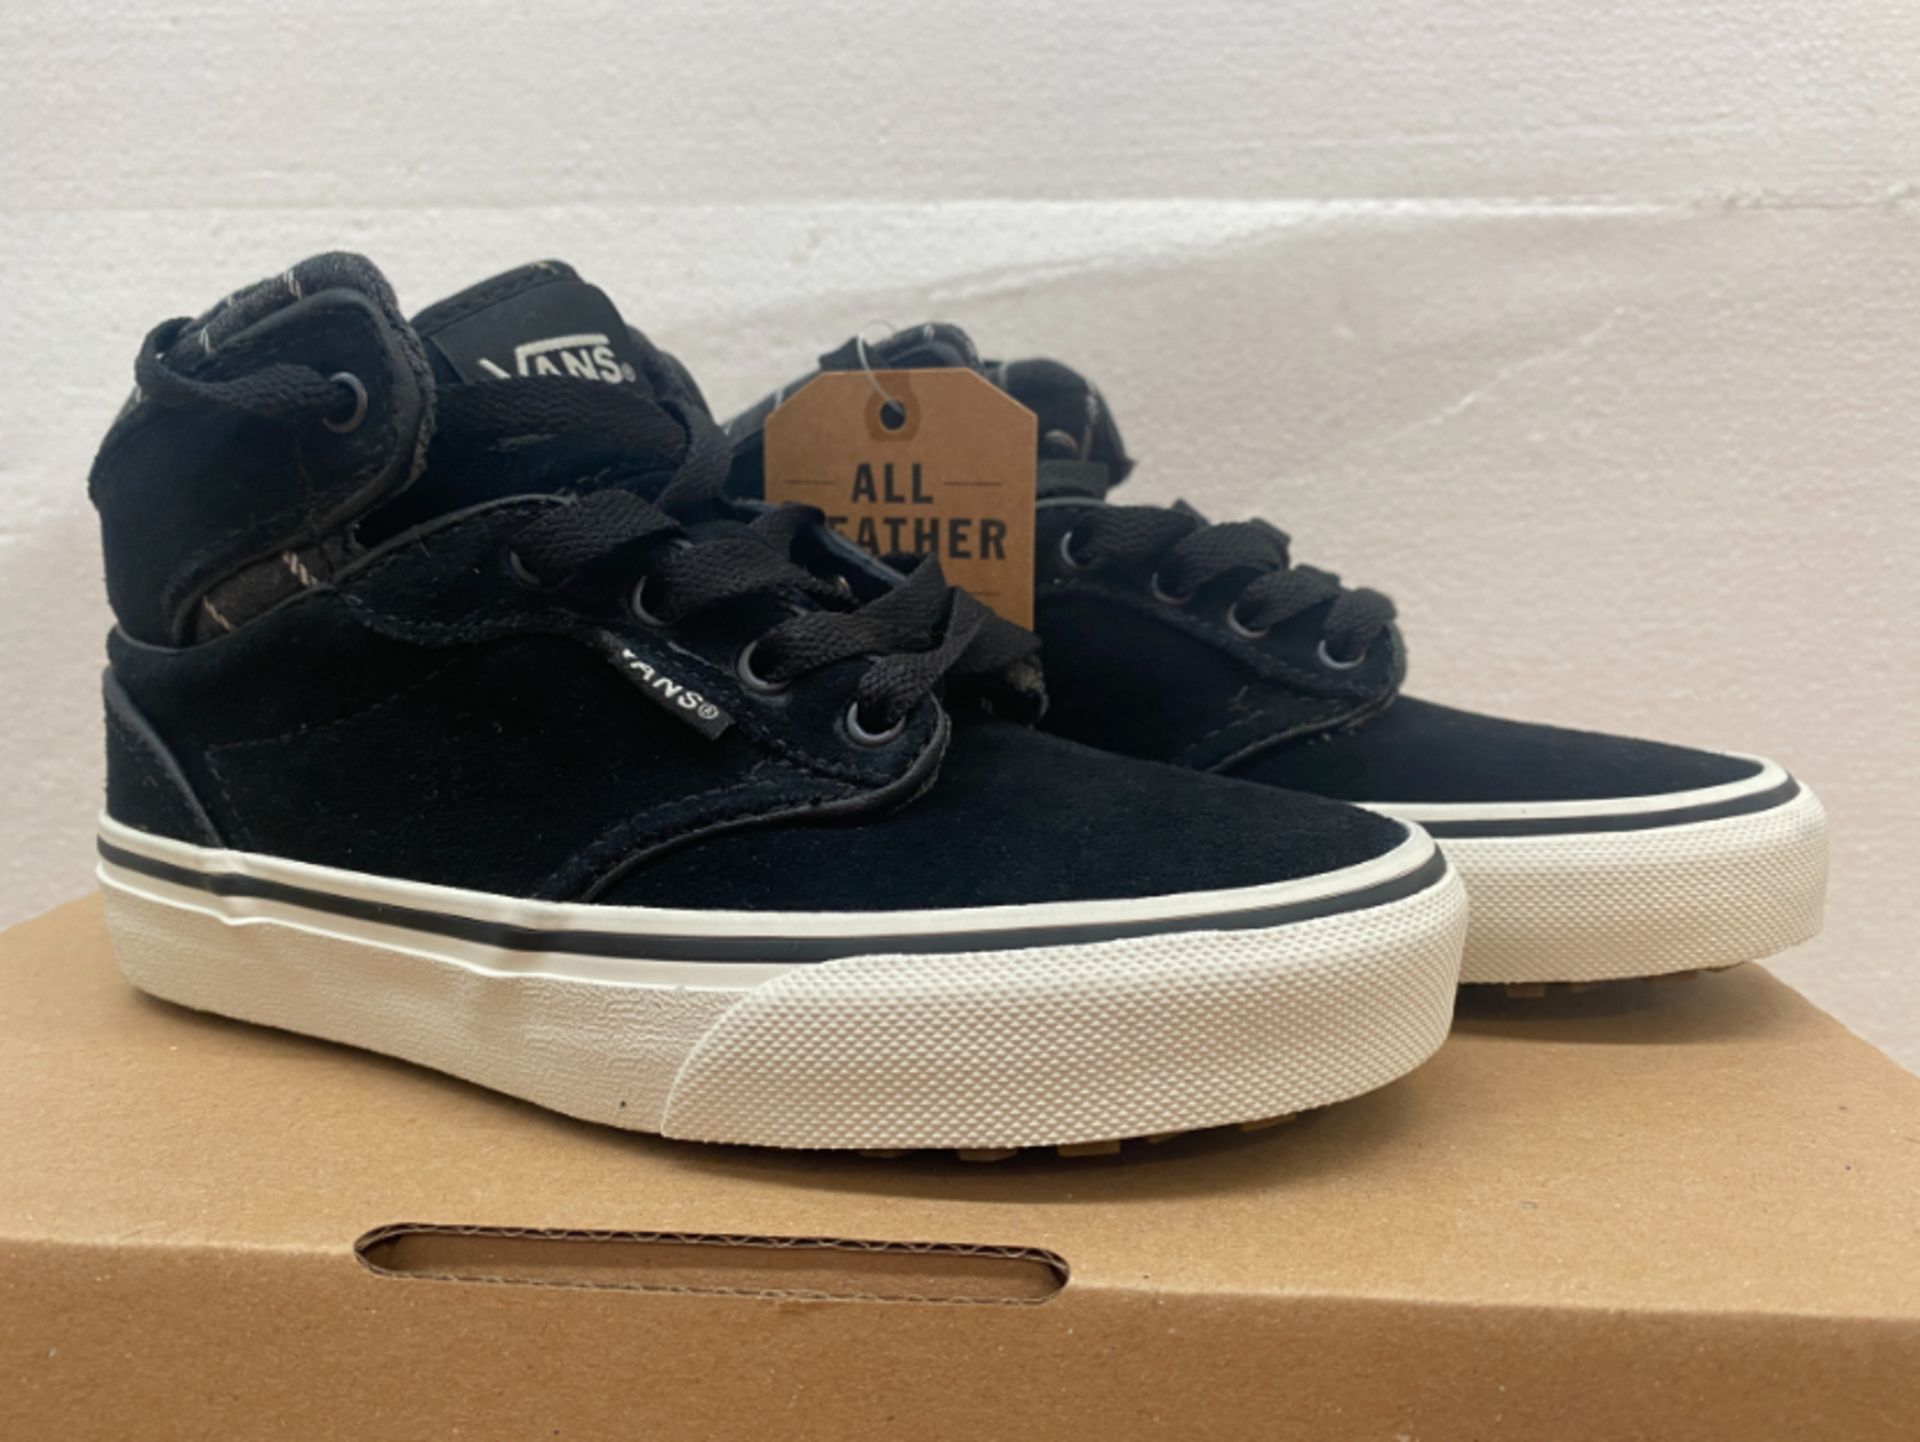 1 LOT TO CONTAIN AN AS NEW BOXED PAIR OF VANS UK SIZE J13 HIGH TOP TRAINER IN BLACK